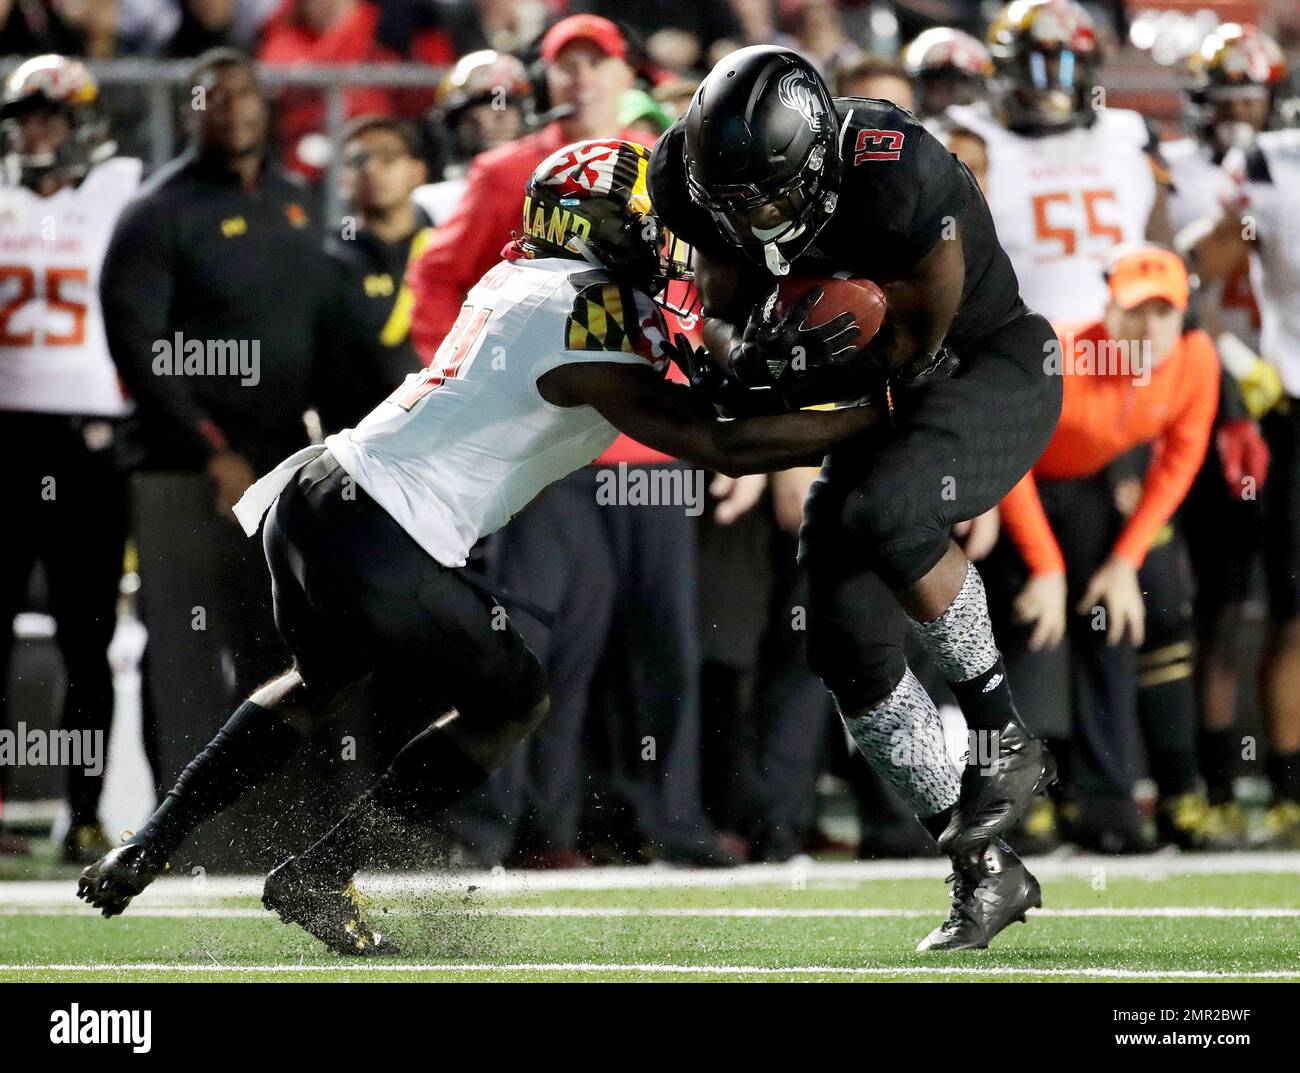 Rutgers running back Gus Edwards, right, makes a move before avoiding a  tackle by Maryland defensive back RaVon Davis on his way to score a  touchdown during the second half of an